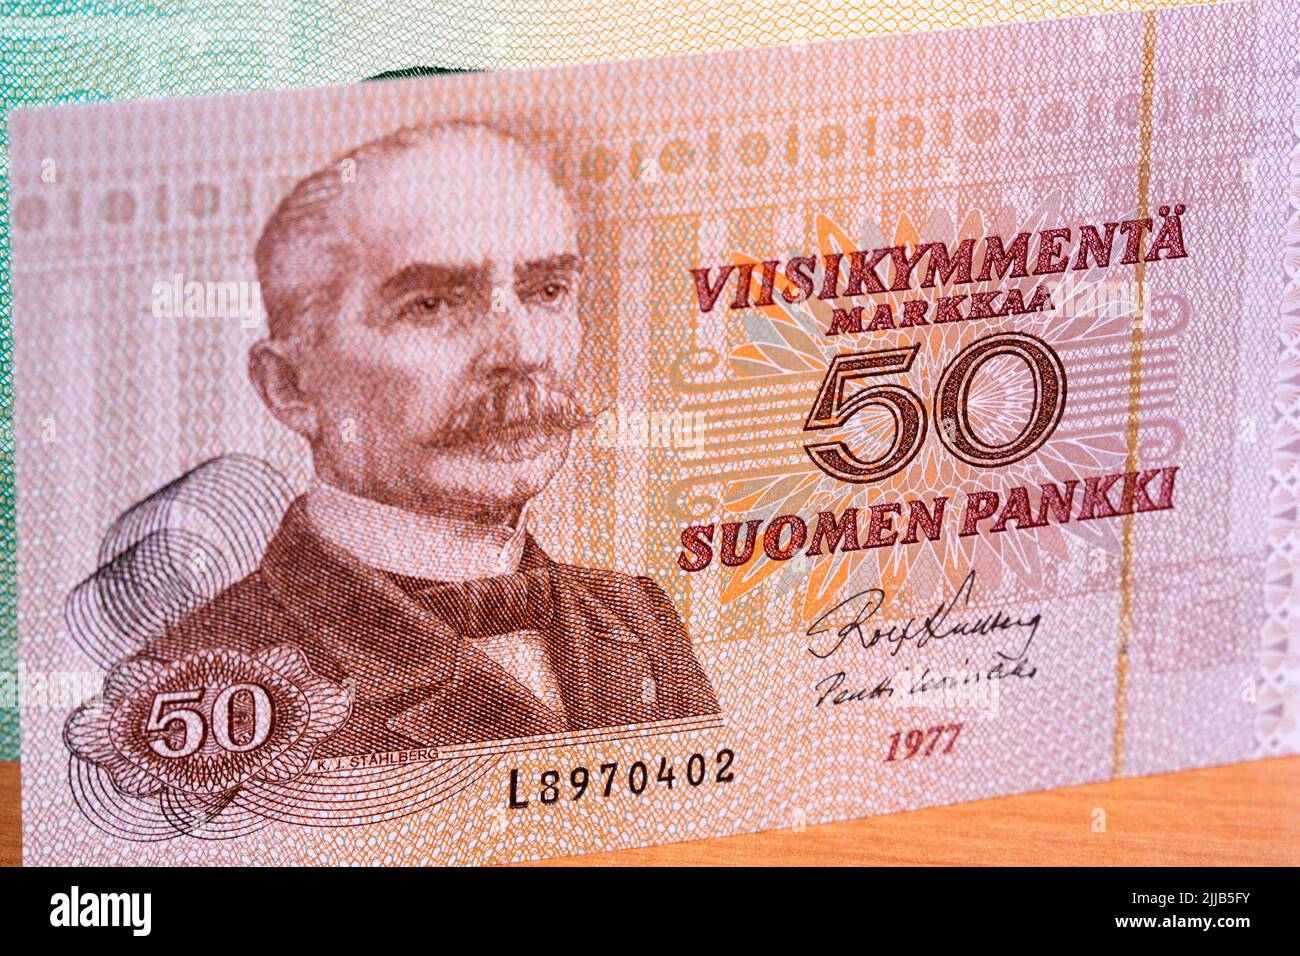 Old Finnish money - mark a business background Stock Photo